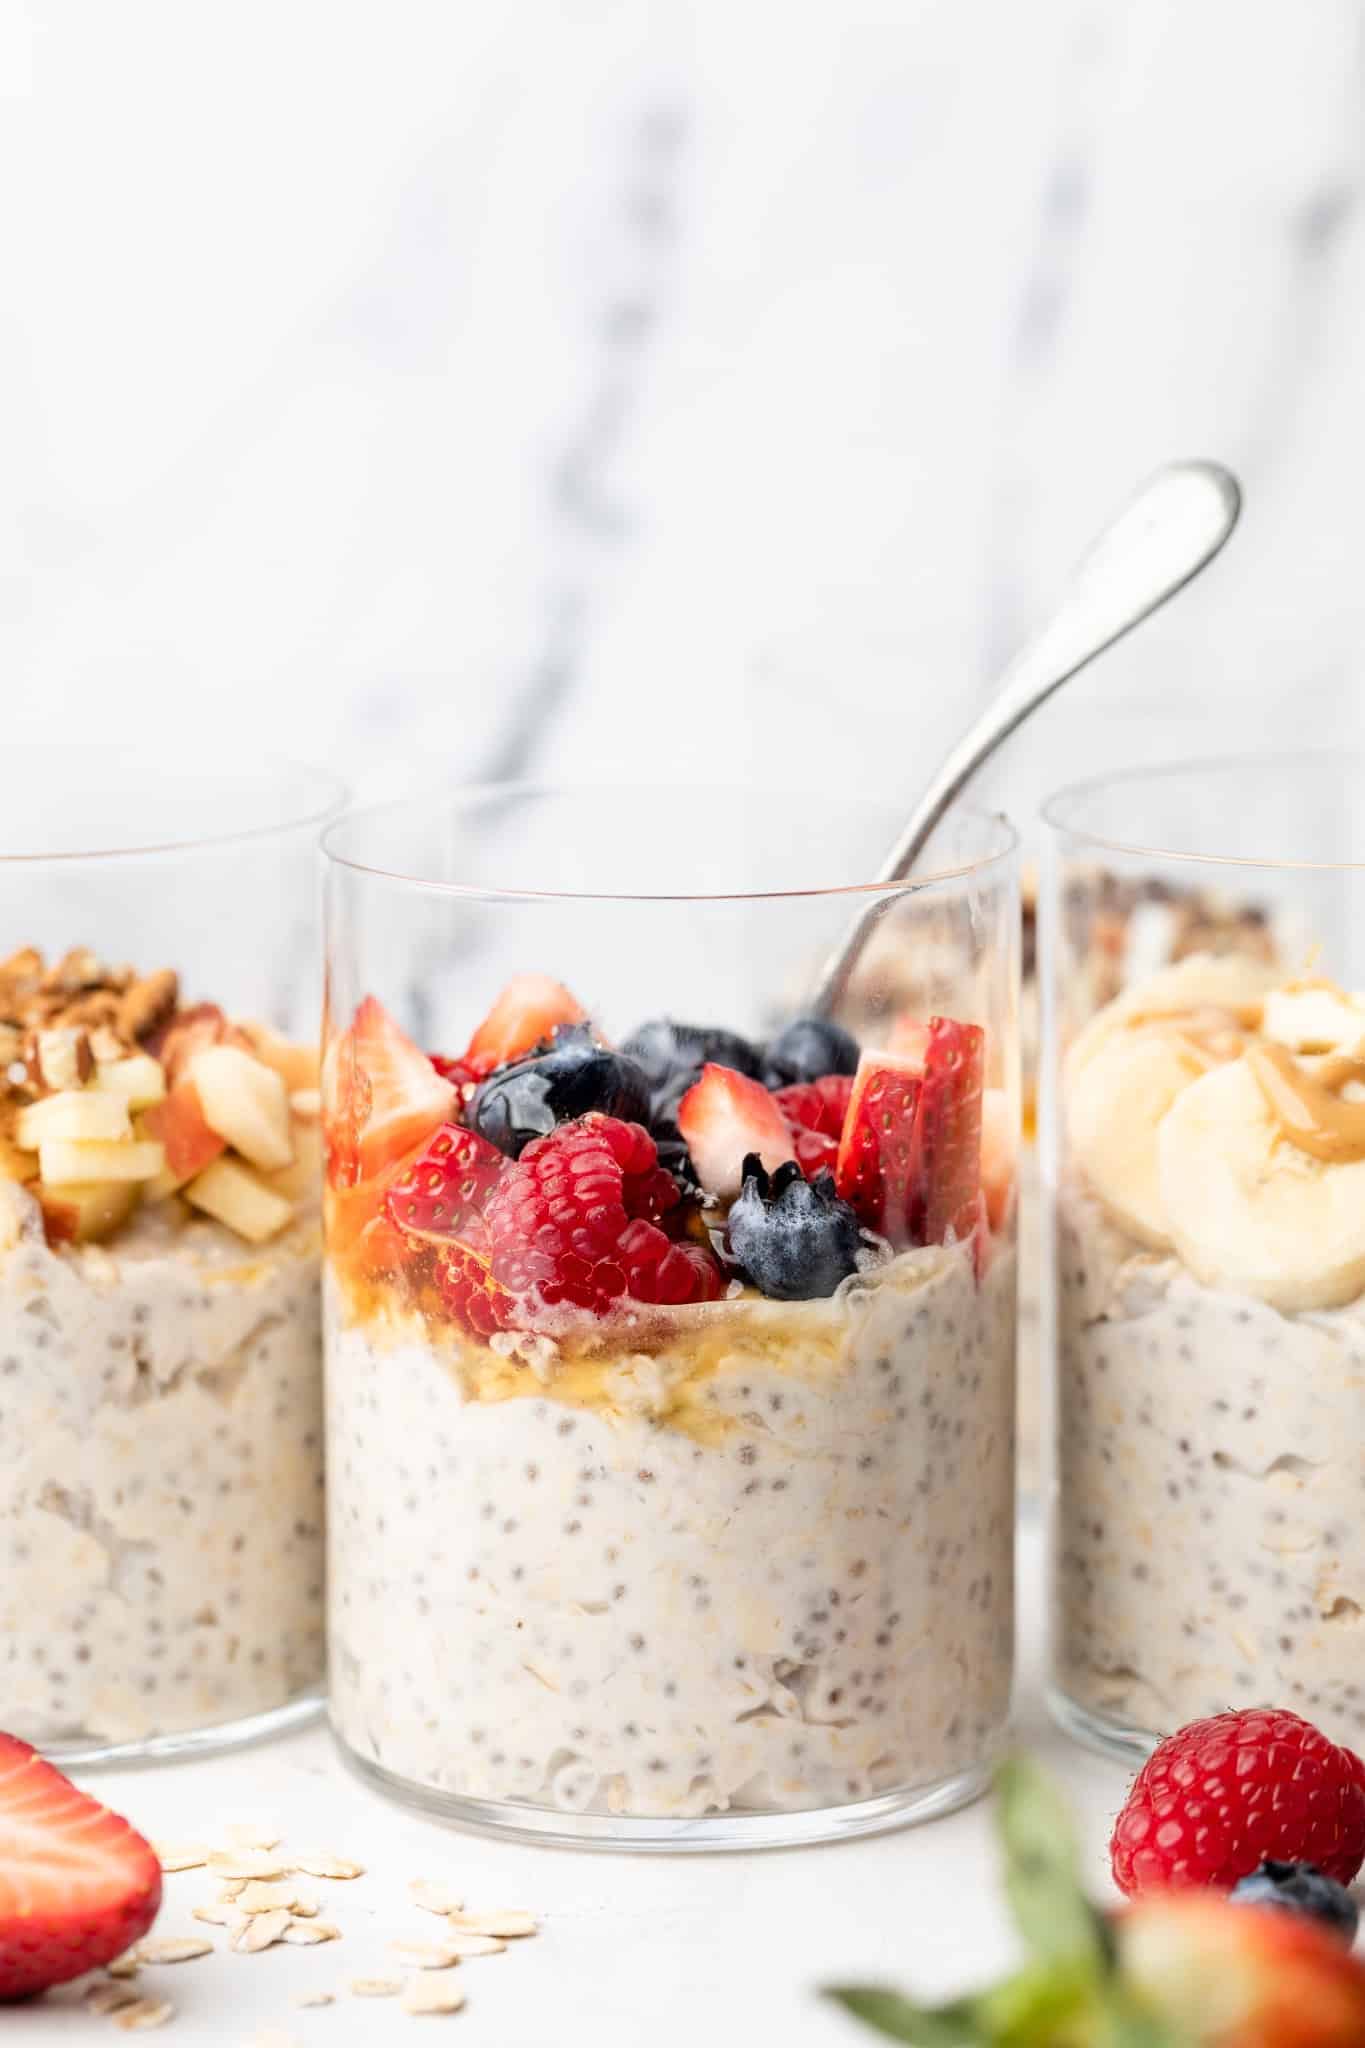 A jar with overnight oats made with coconut milk with berries and a spoon.